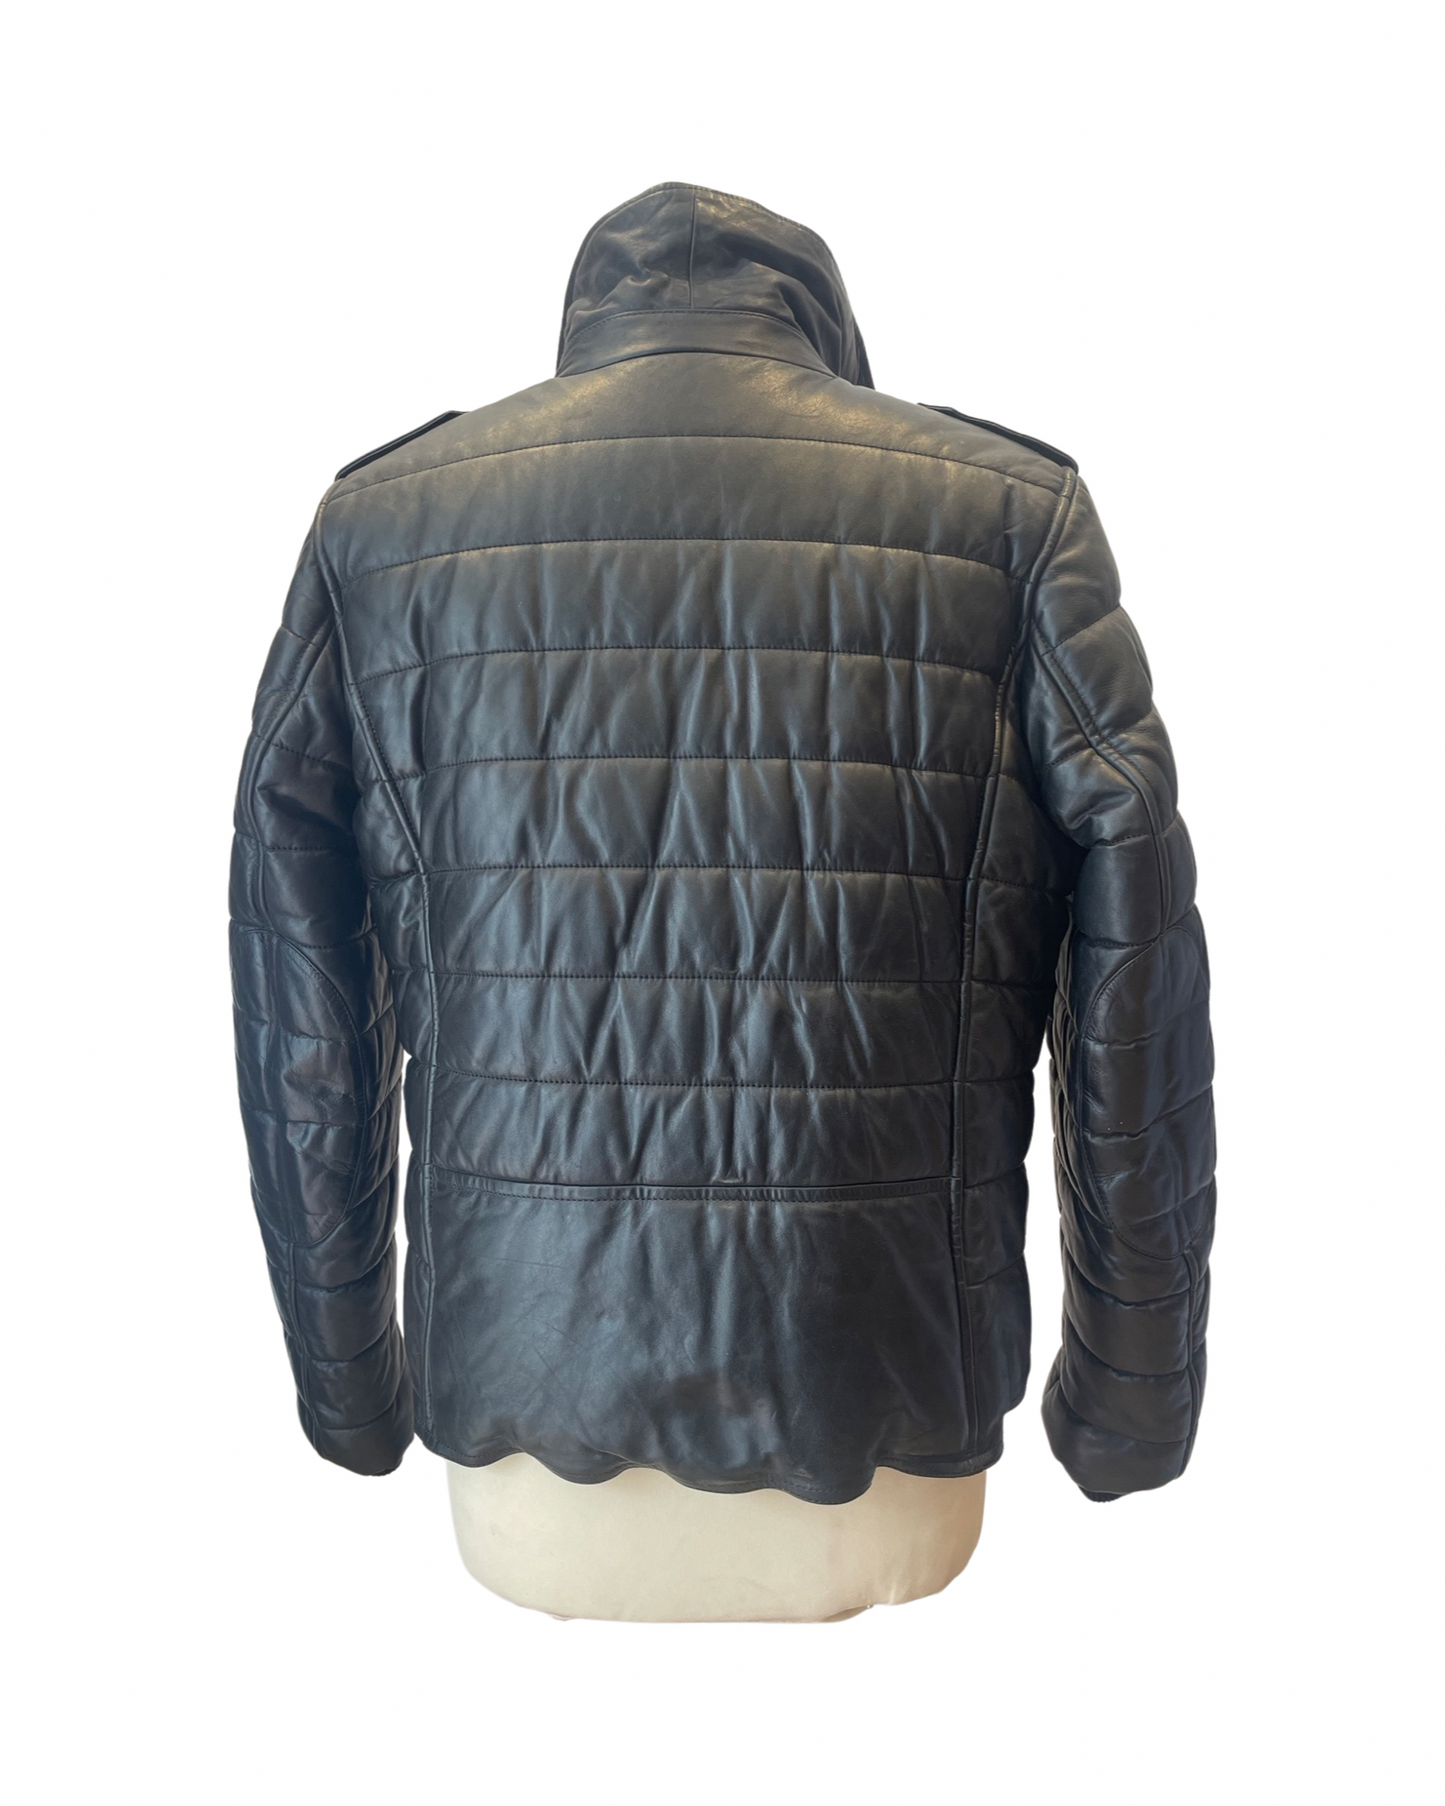 Alexander Wang (for HM) Leather Jacket